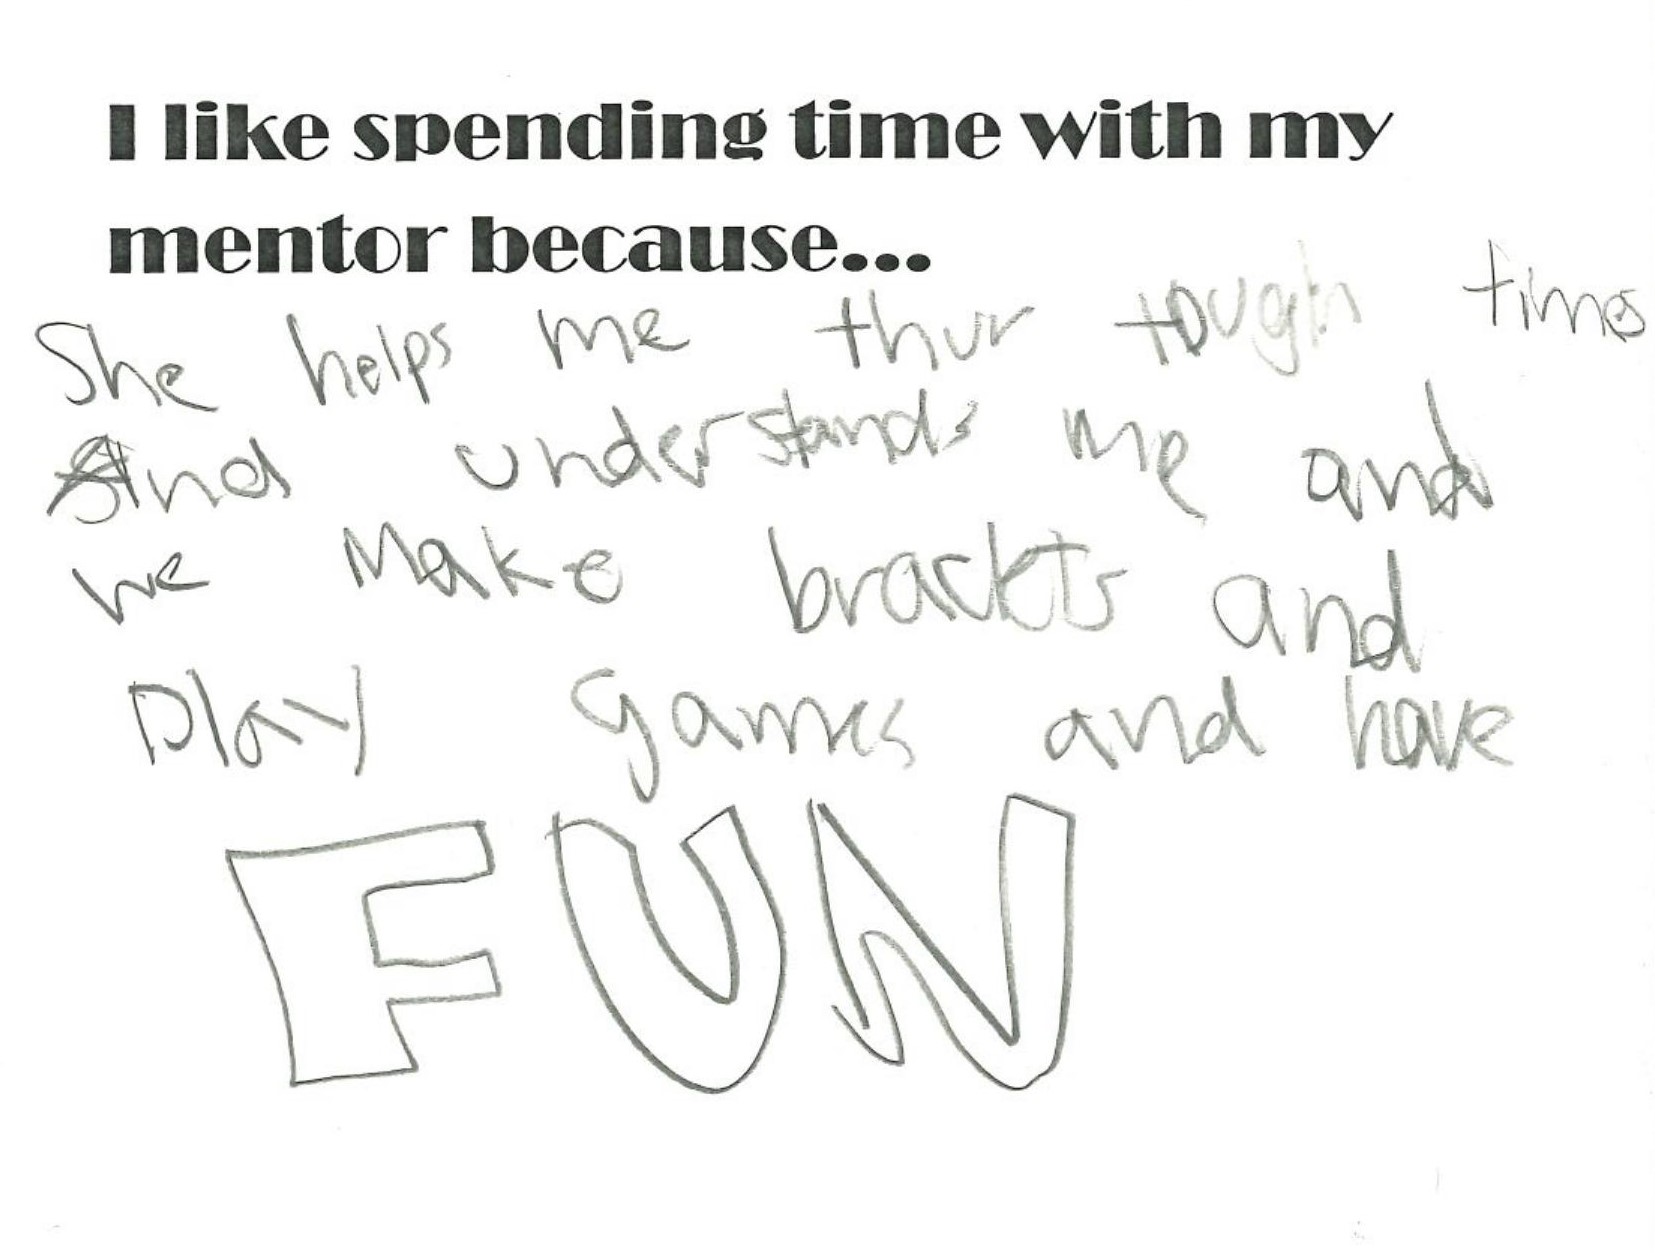 Art essay with text that reads "I like spending time with my mentor because... She helps me thur tough times and understands me and we make braclets and play games and have fun."